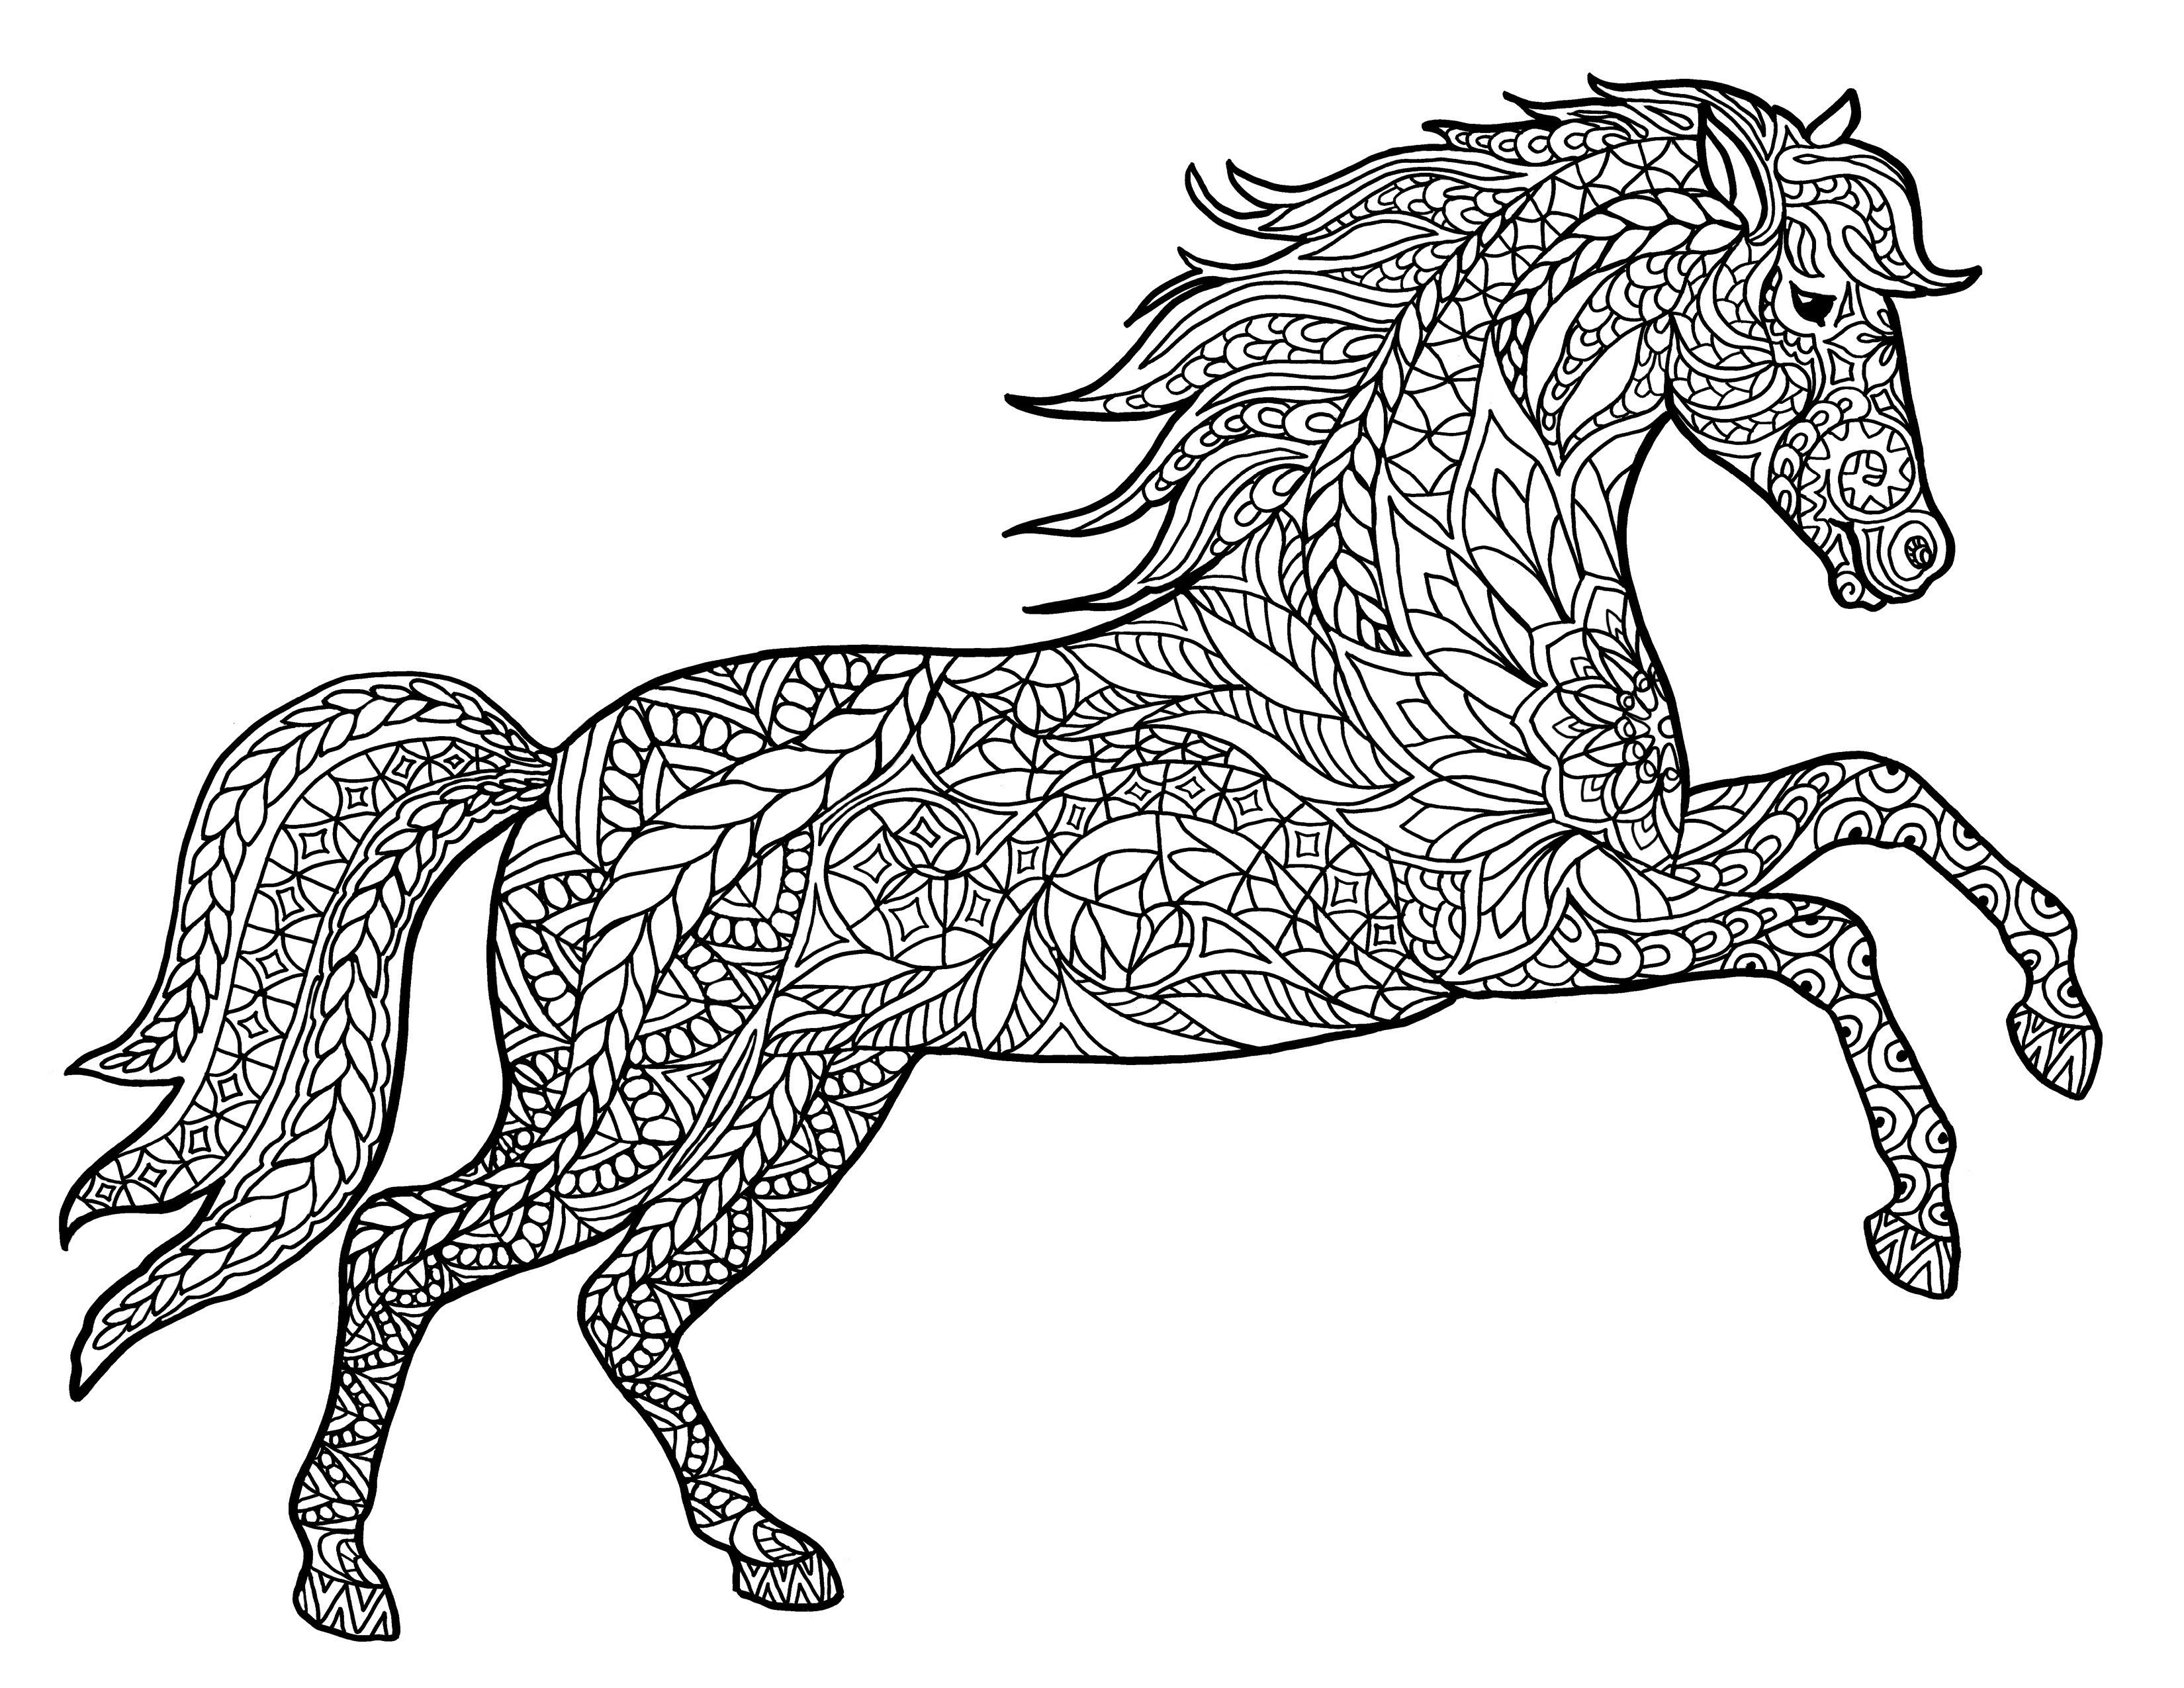 Horse Coloring Pages For Adults
 Animal Coloring Pages for Adults Best Coloring Pages For